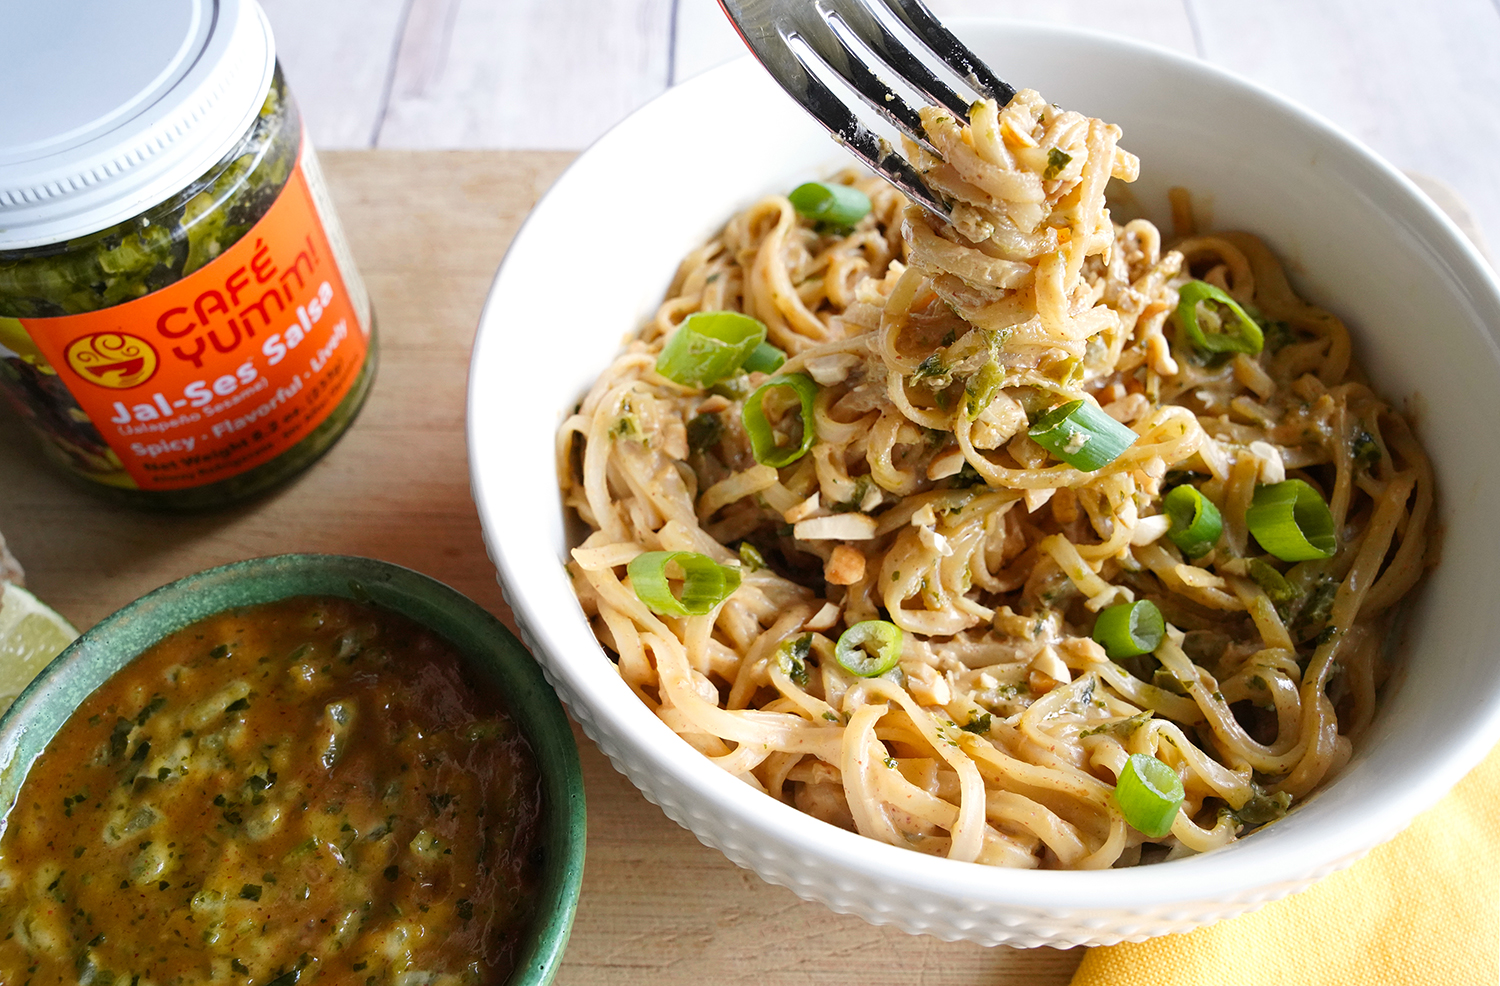 Spicy Noodle with peanut and Jal-Ses Yumm! Salsa